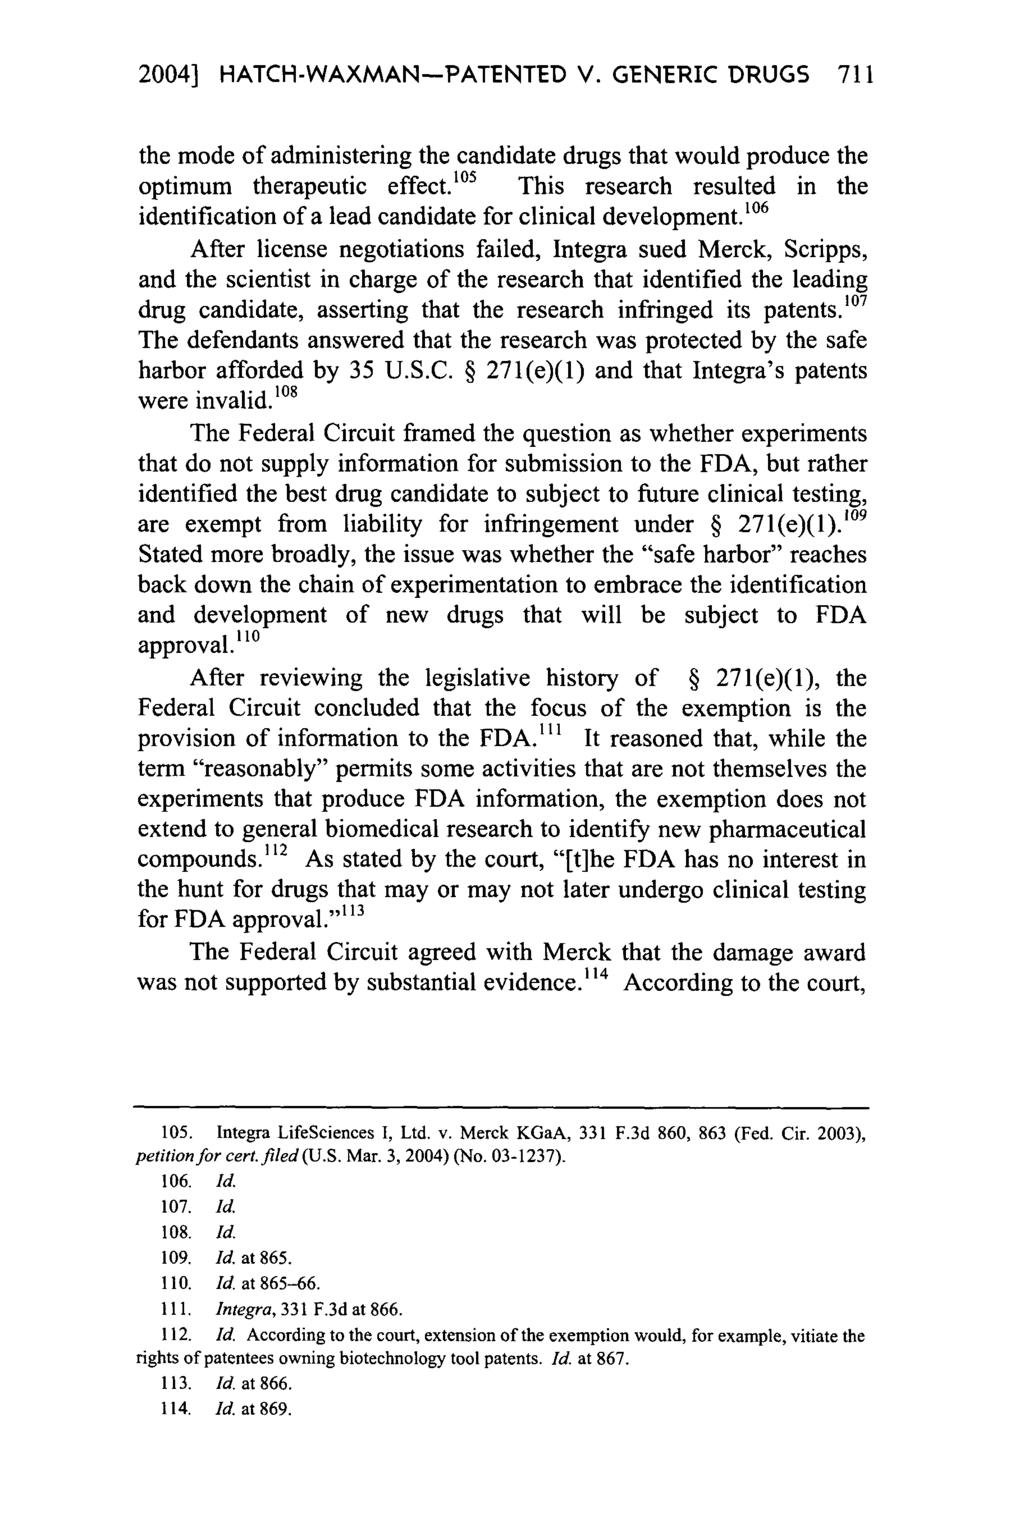 2004] HATCH-WAXMAN-PATENTED V. GENERIC DRUGS 711 the mode of administering the candidate drugs that would produce the optimum therapeutic effect.